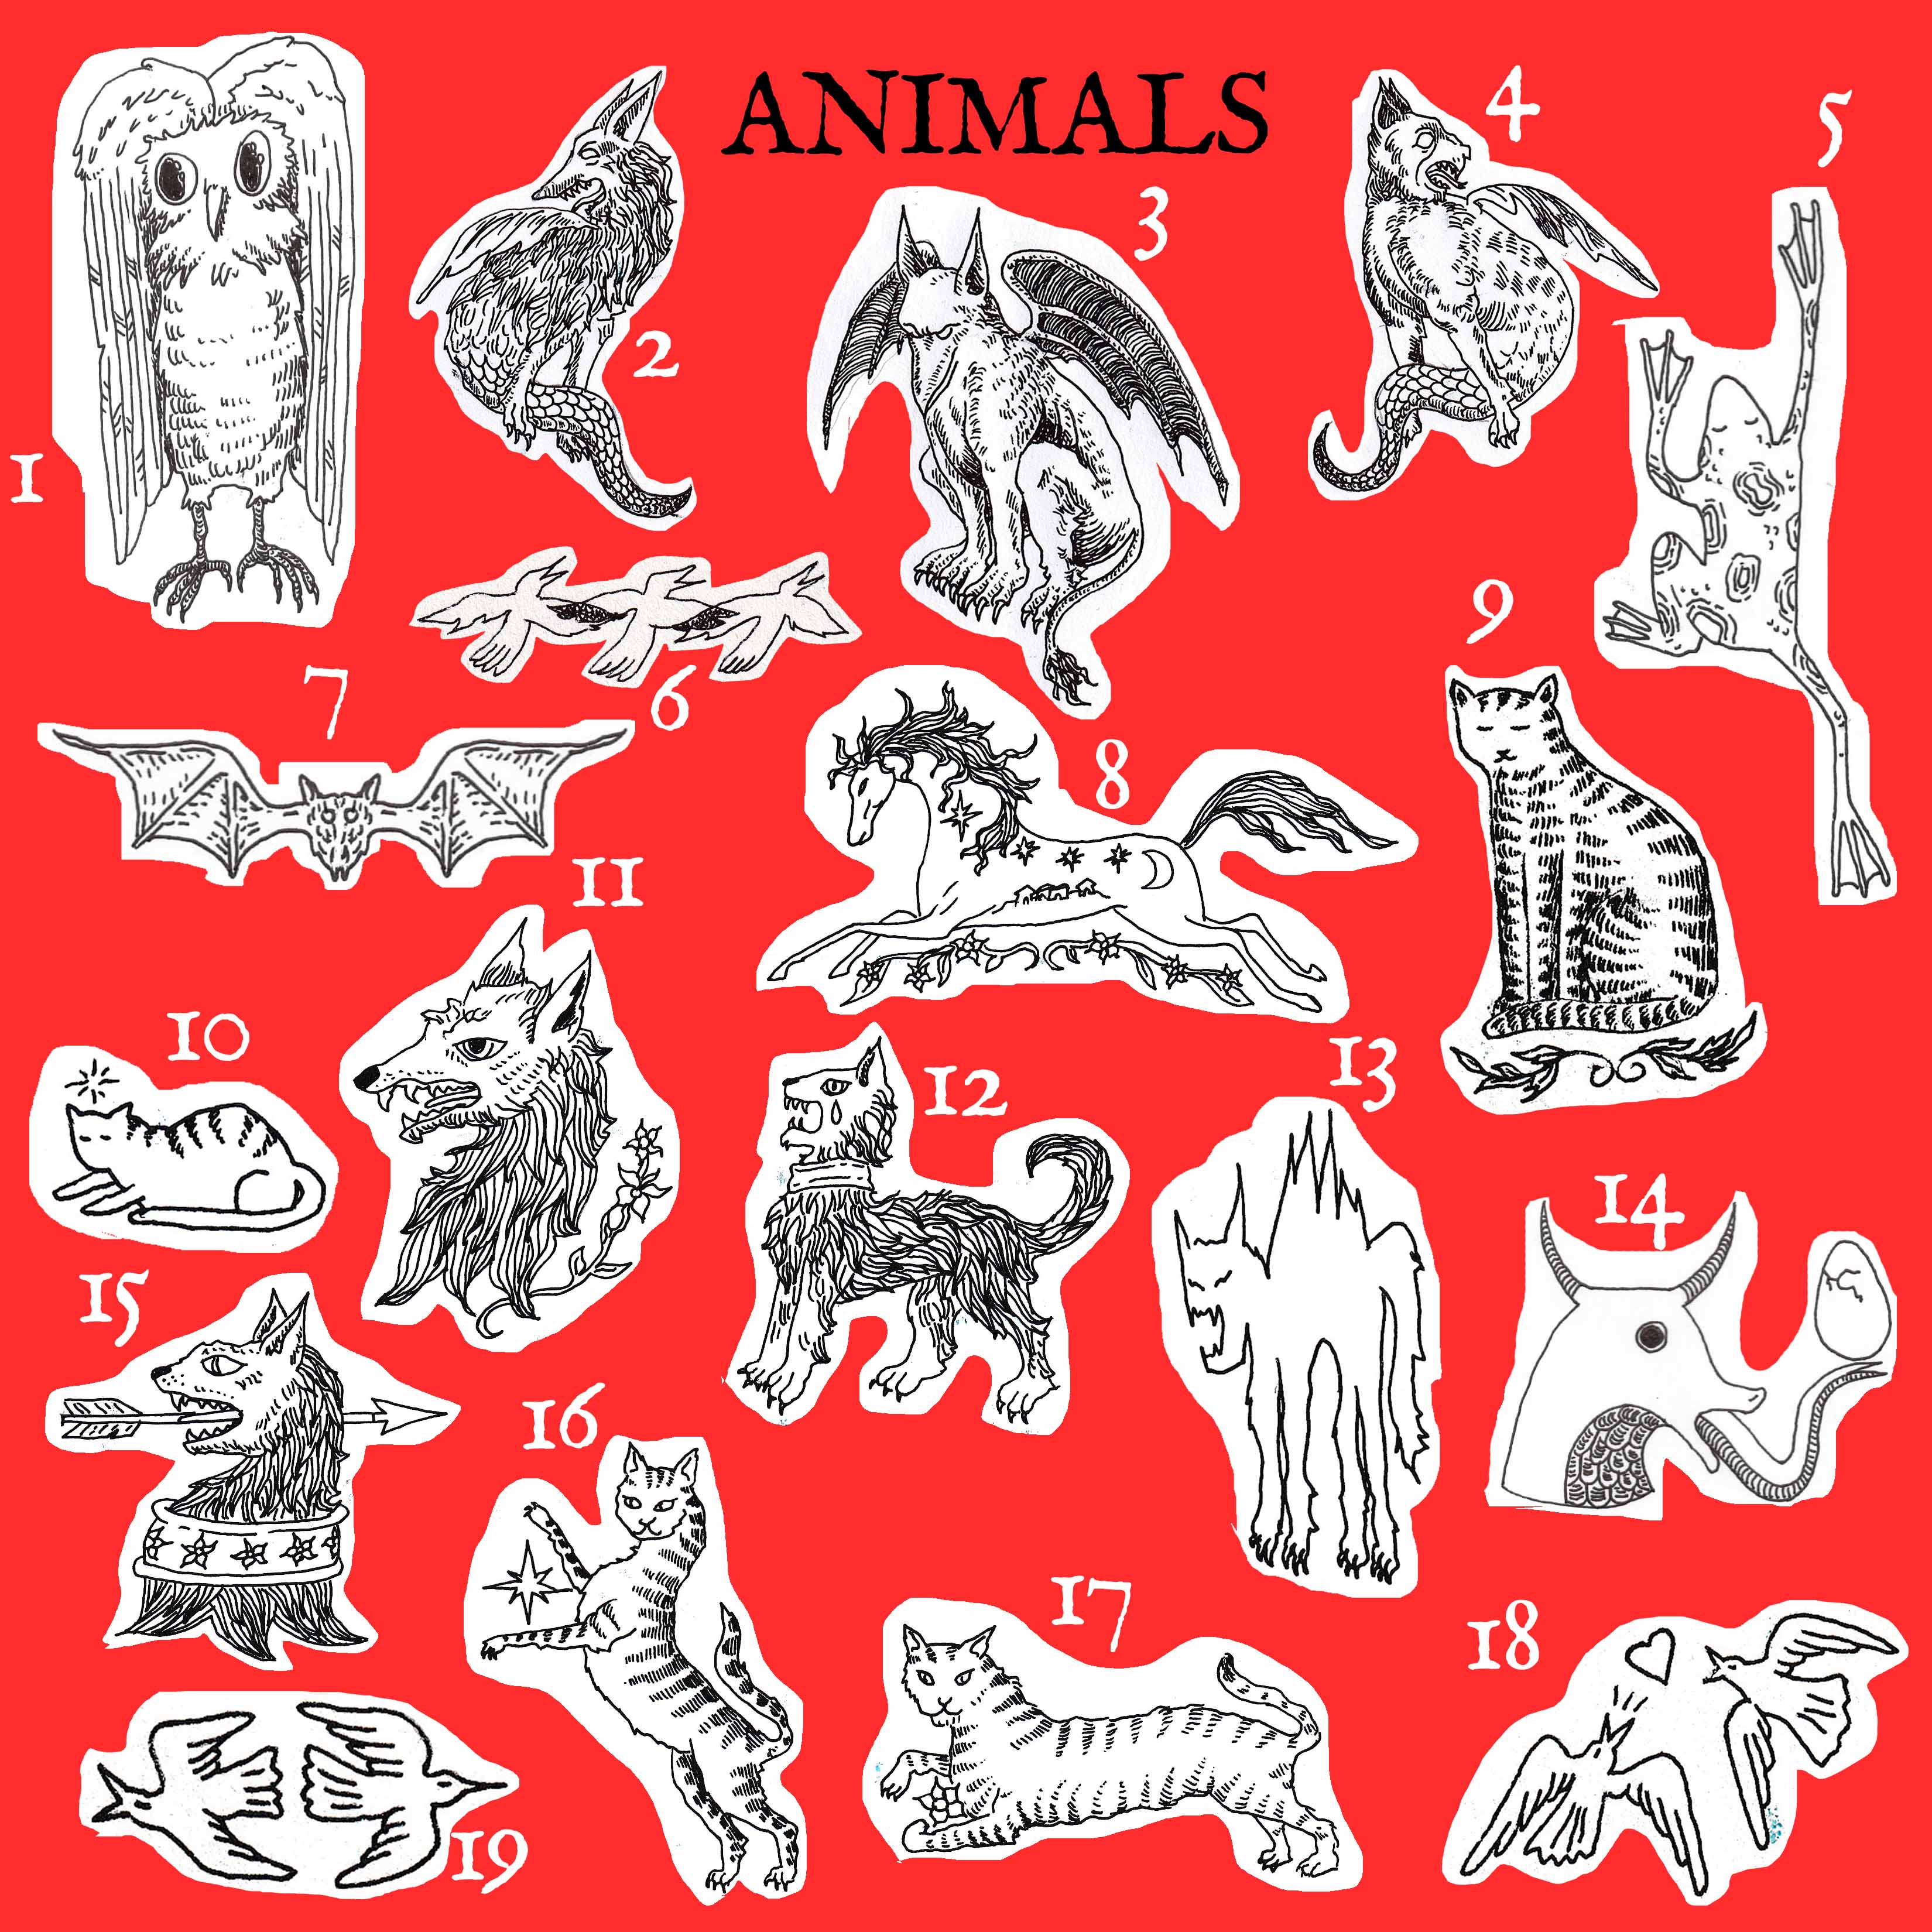 01- a tall owl <br>
02- left facing gargoyle, 03-a lion tailed gargoyle,04-a right facing gargoyle<br> 05-a climbing frog, trio of birds, 07-bat<br>
08-horse with nature elements, 09-regal cat, 10-lounging cat<br>
11-wolf head next to flowers,12-feral creature, 13- halloween cat <br>
14- viking creature,15-slain creature,storybook cat 17-flower cat<br>
18 and 19, birds
